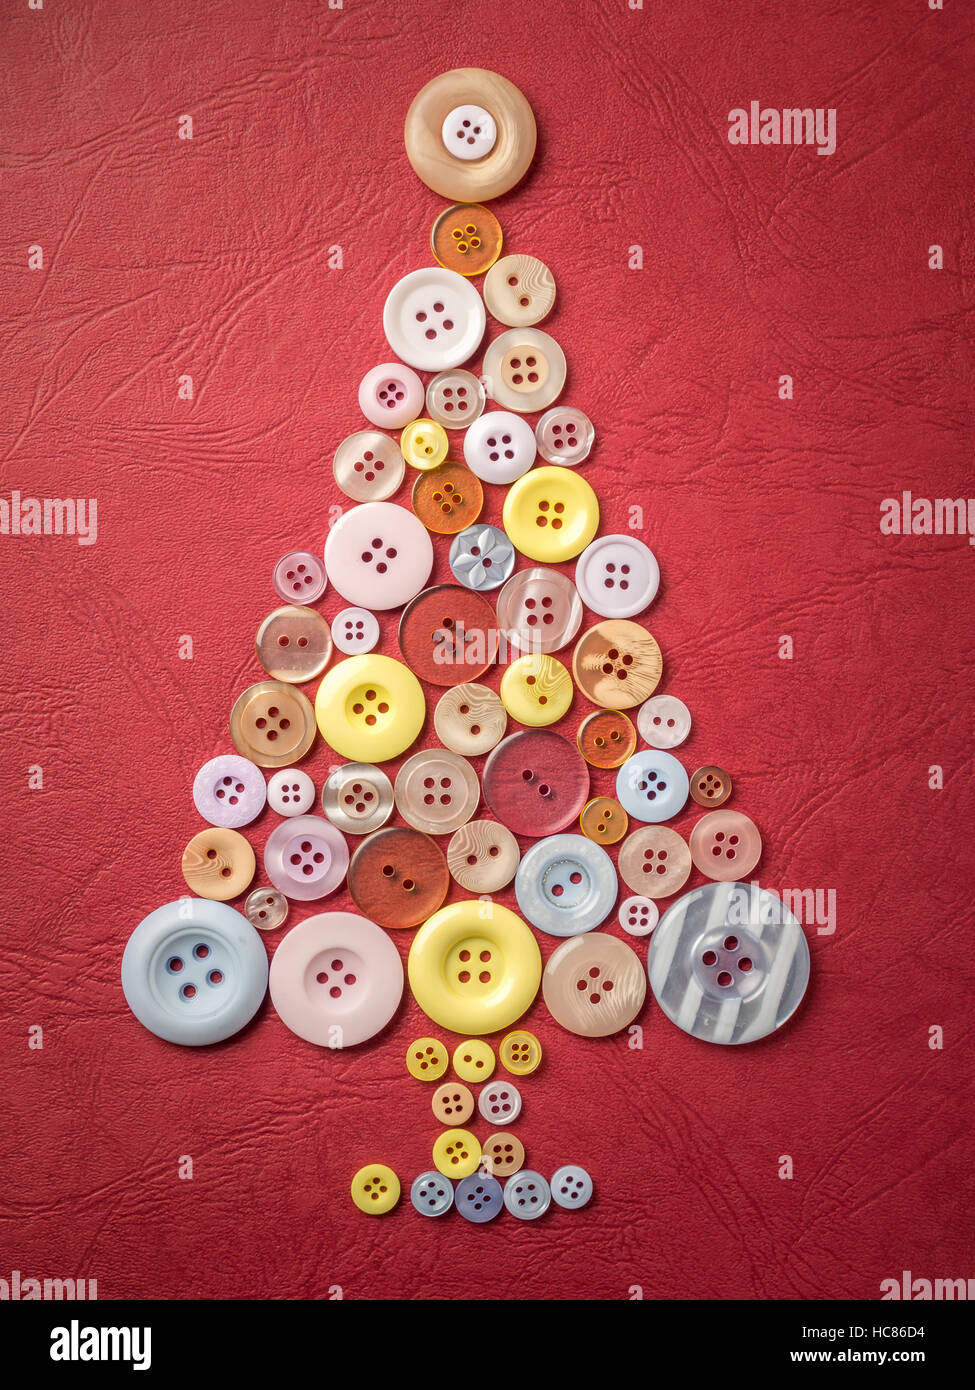 Christmas tree formed of apparel buttons on red textured background Stock Photo